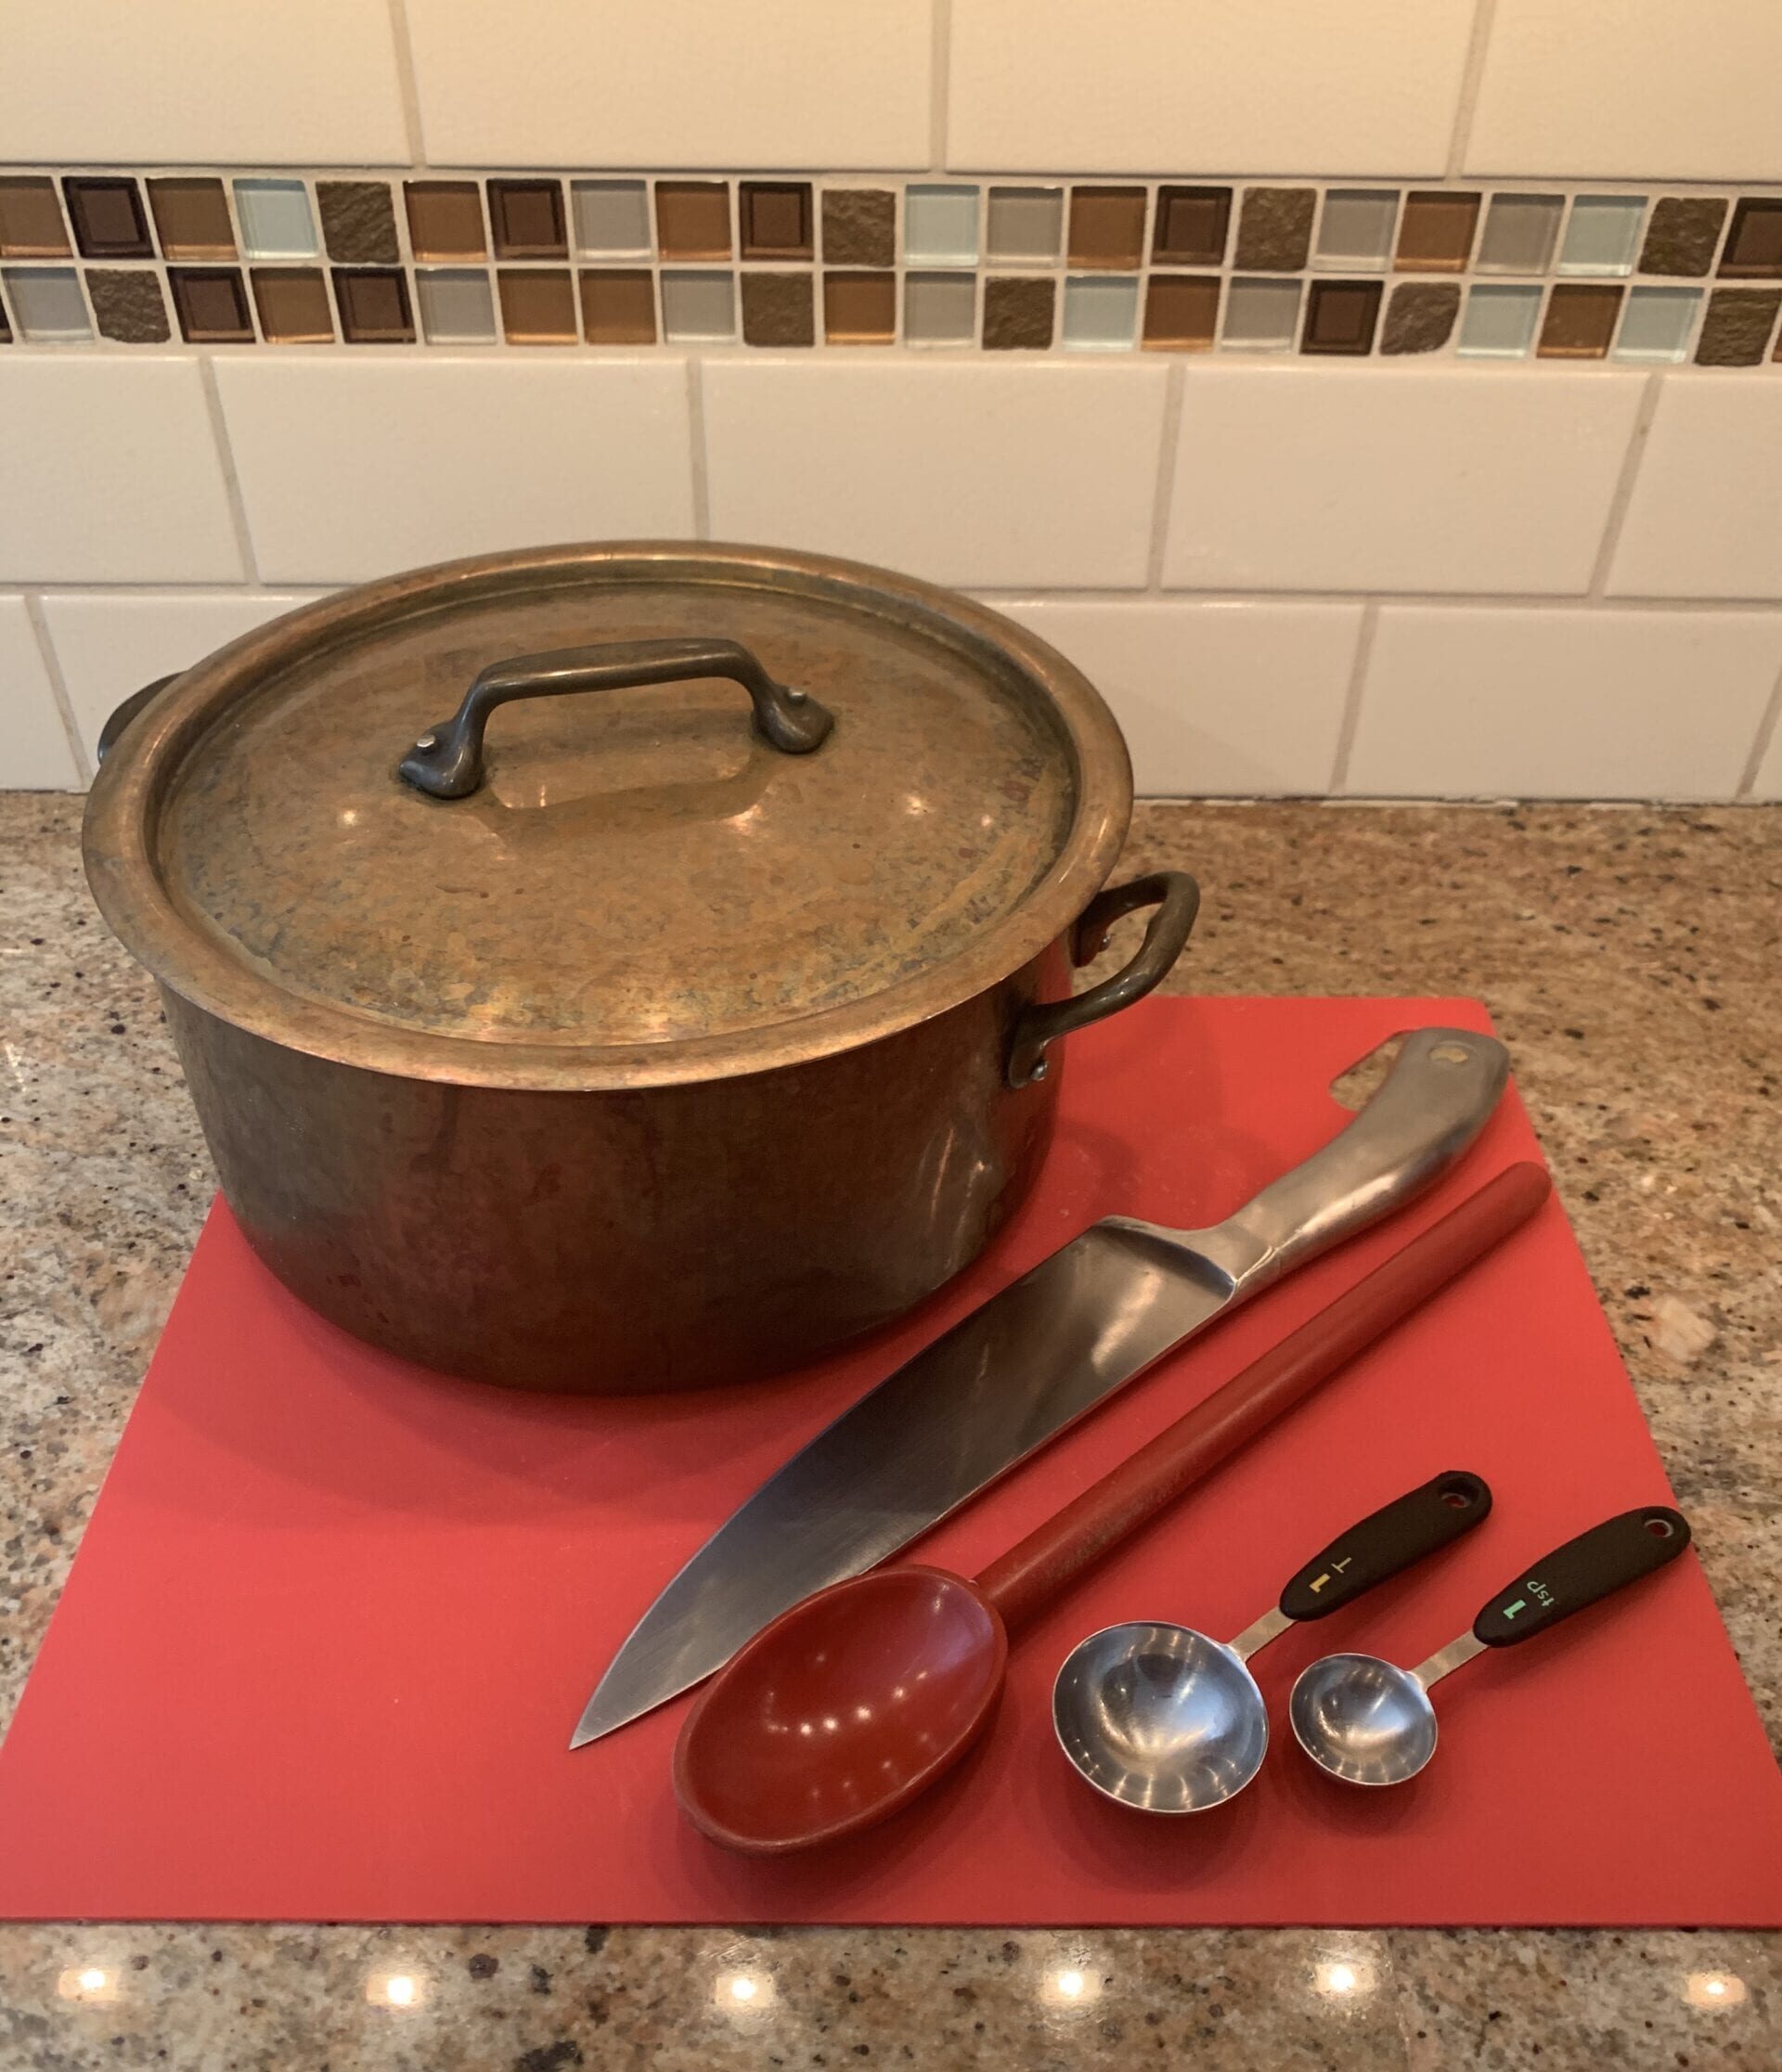 Copper dutch oven and cooking utensils